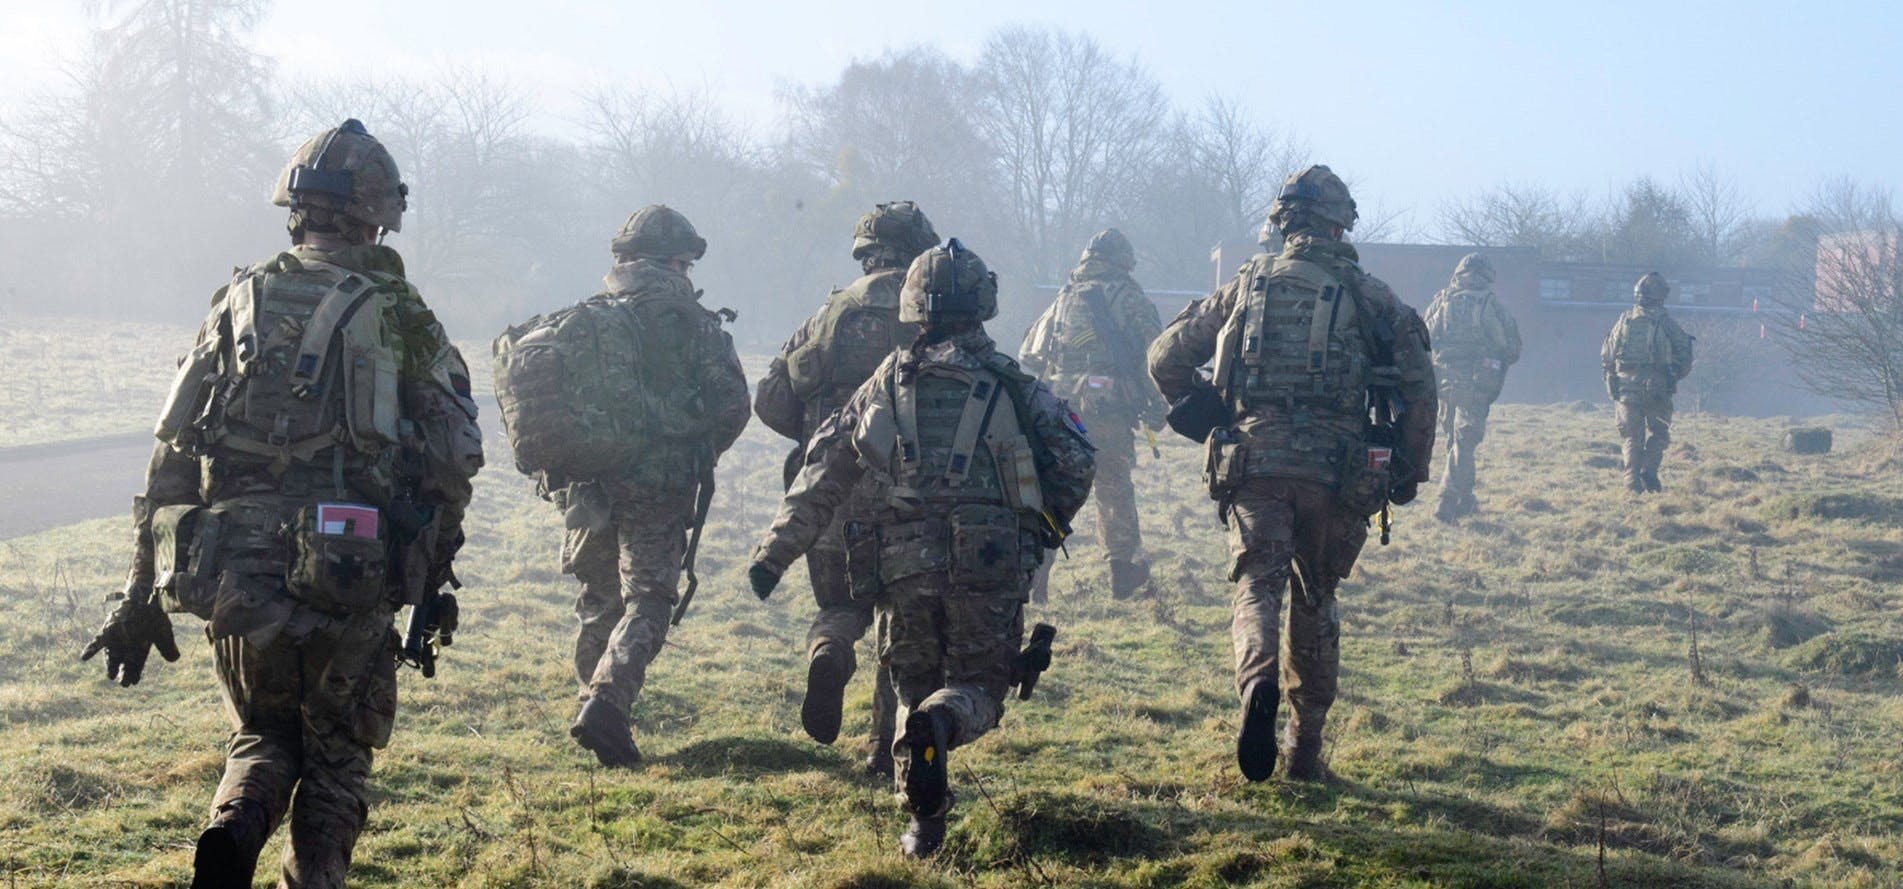 Surge in counter-terrorism referrals in UK armed forces